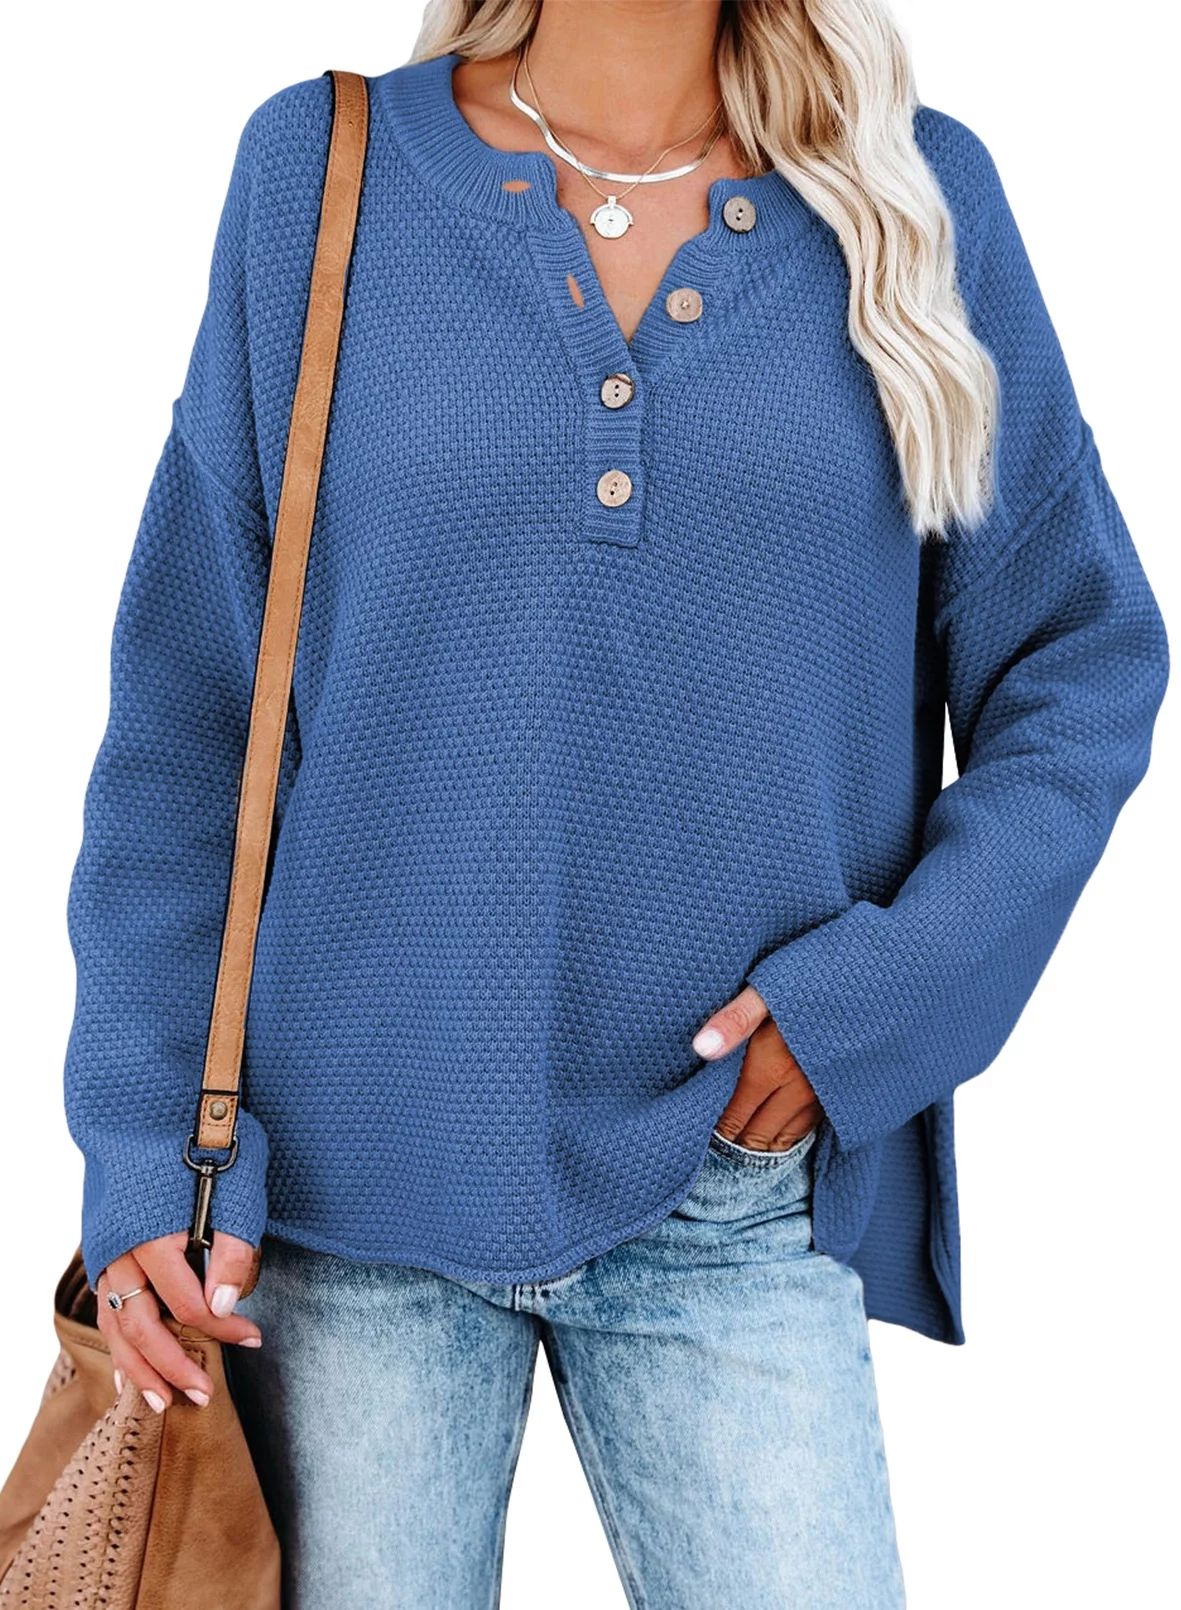 Aleumdr Womens Plus Size Sweater Casual Long Sleeve Fall Winter Warm Pullover Tops 16 18 | Walmart (US)